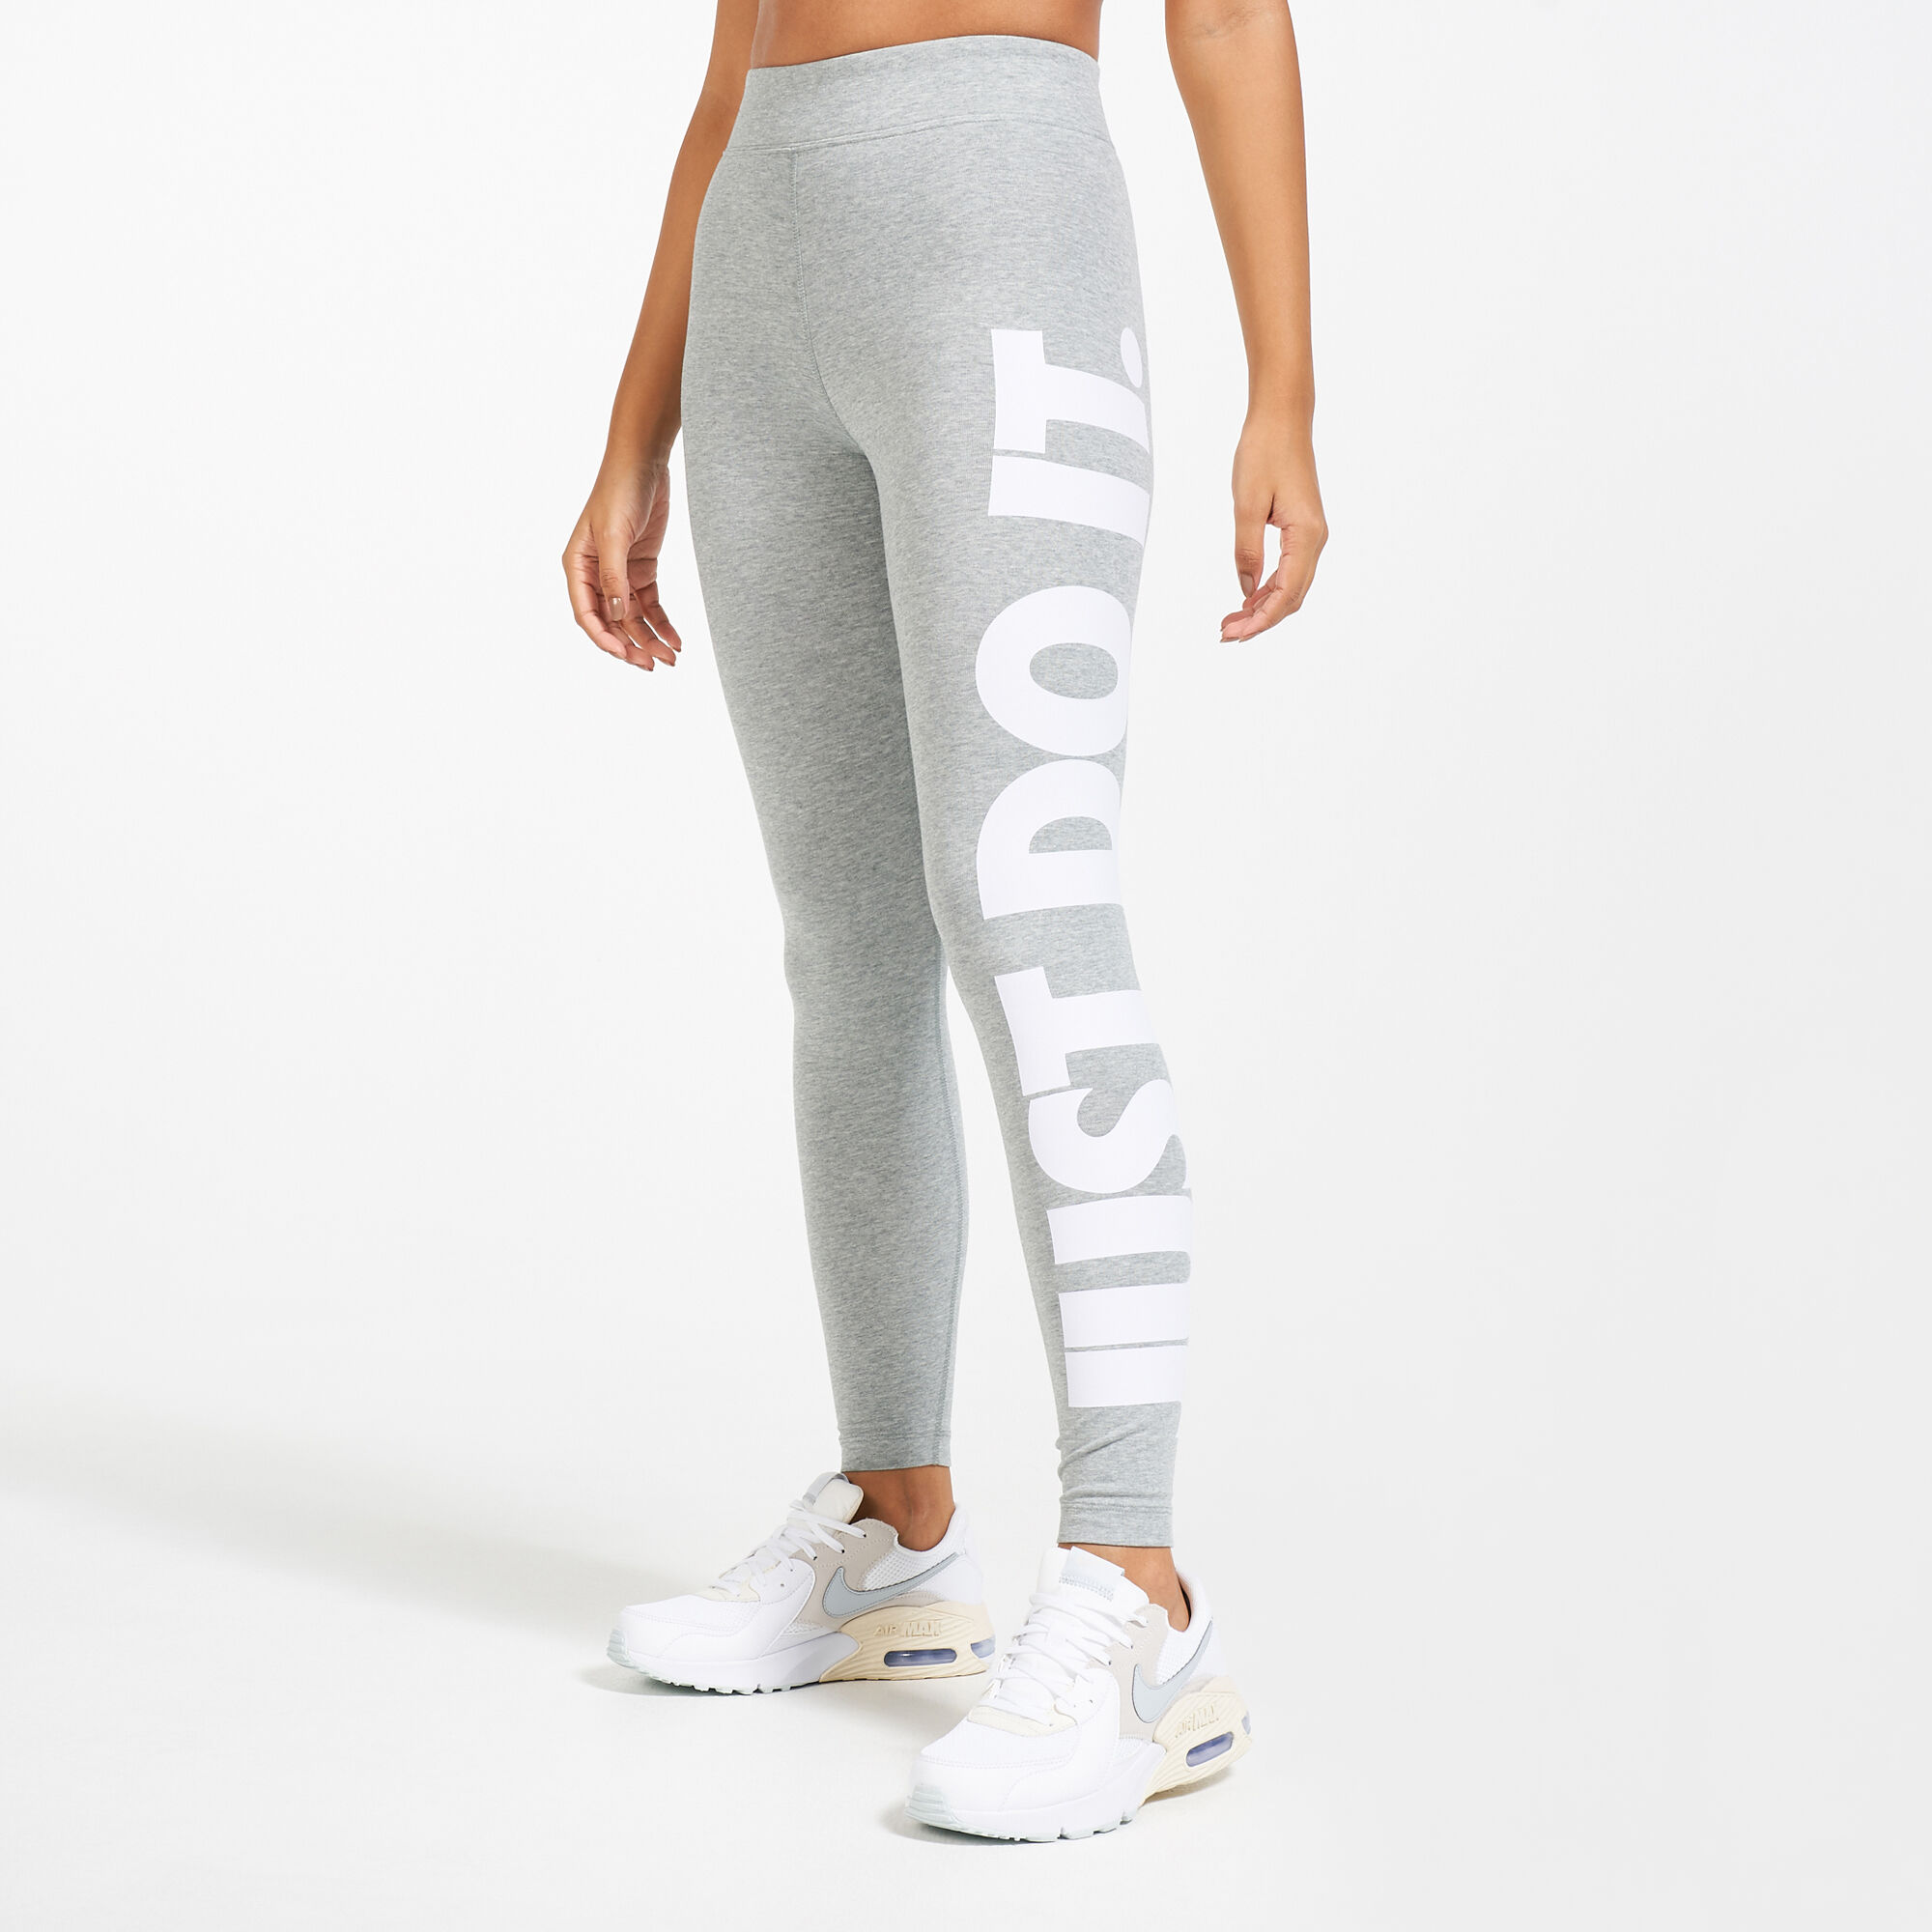 Nike Just Do It Leggings Size XS - $14 - From Maddy